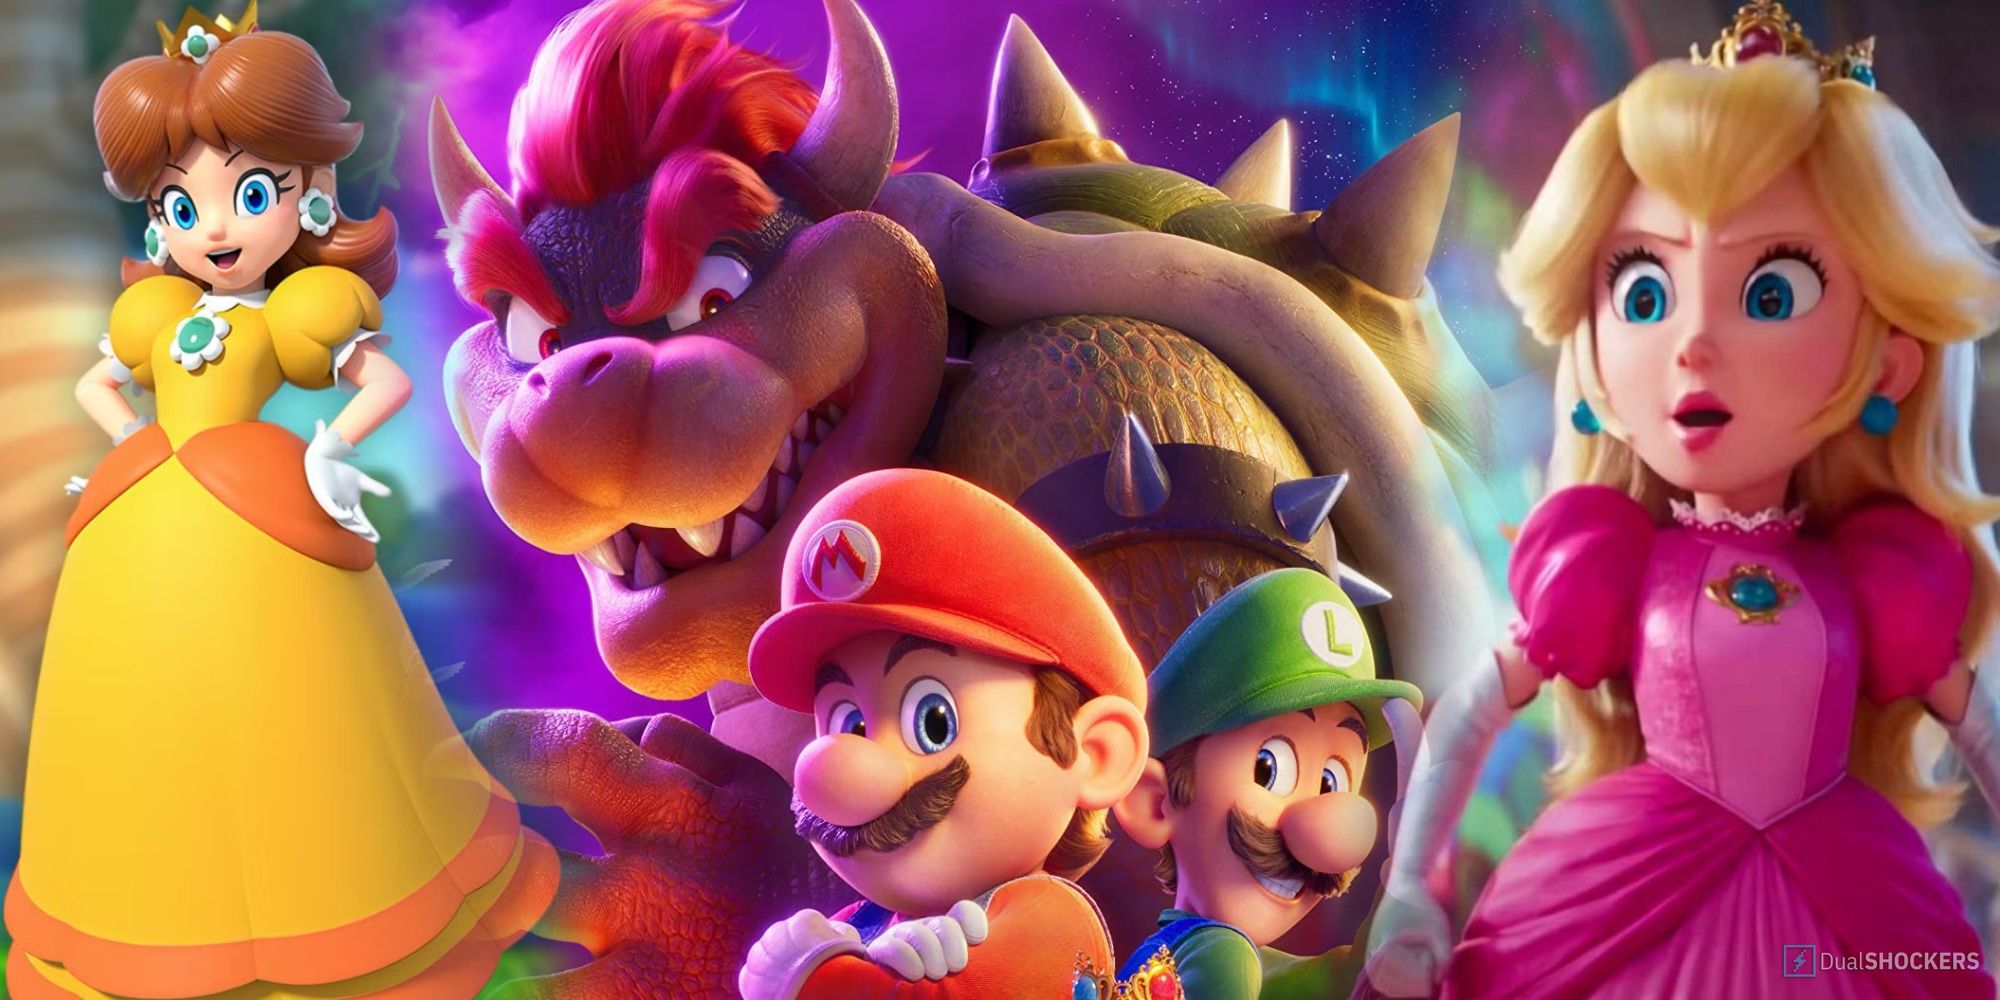 Best Super Mario Characters collage, Daisy, Bowser, Mario, Luigi, and Peach